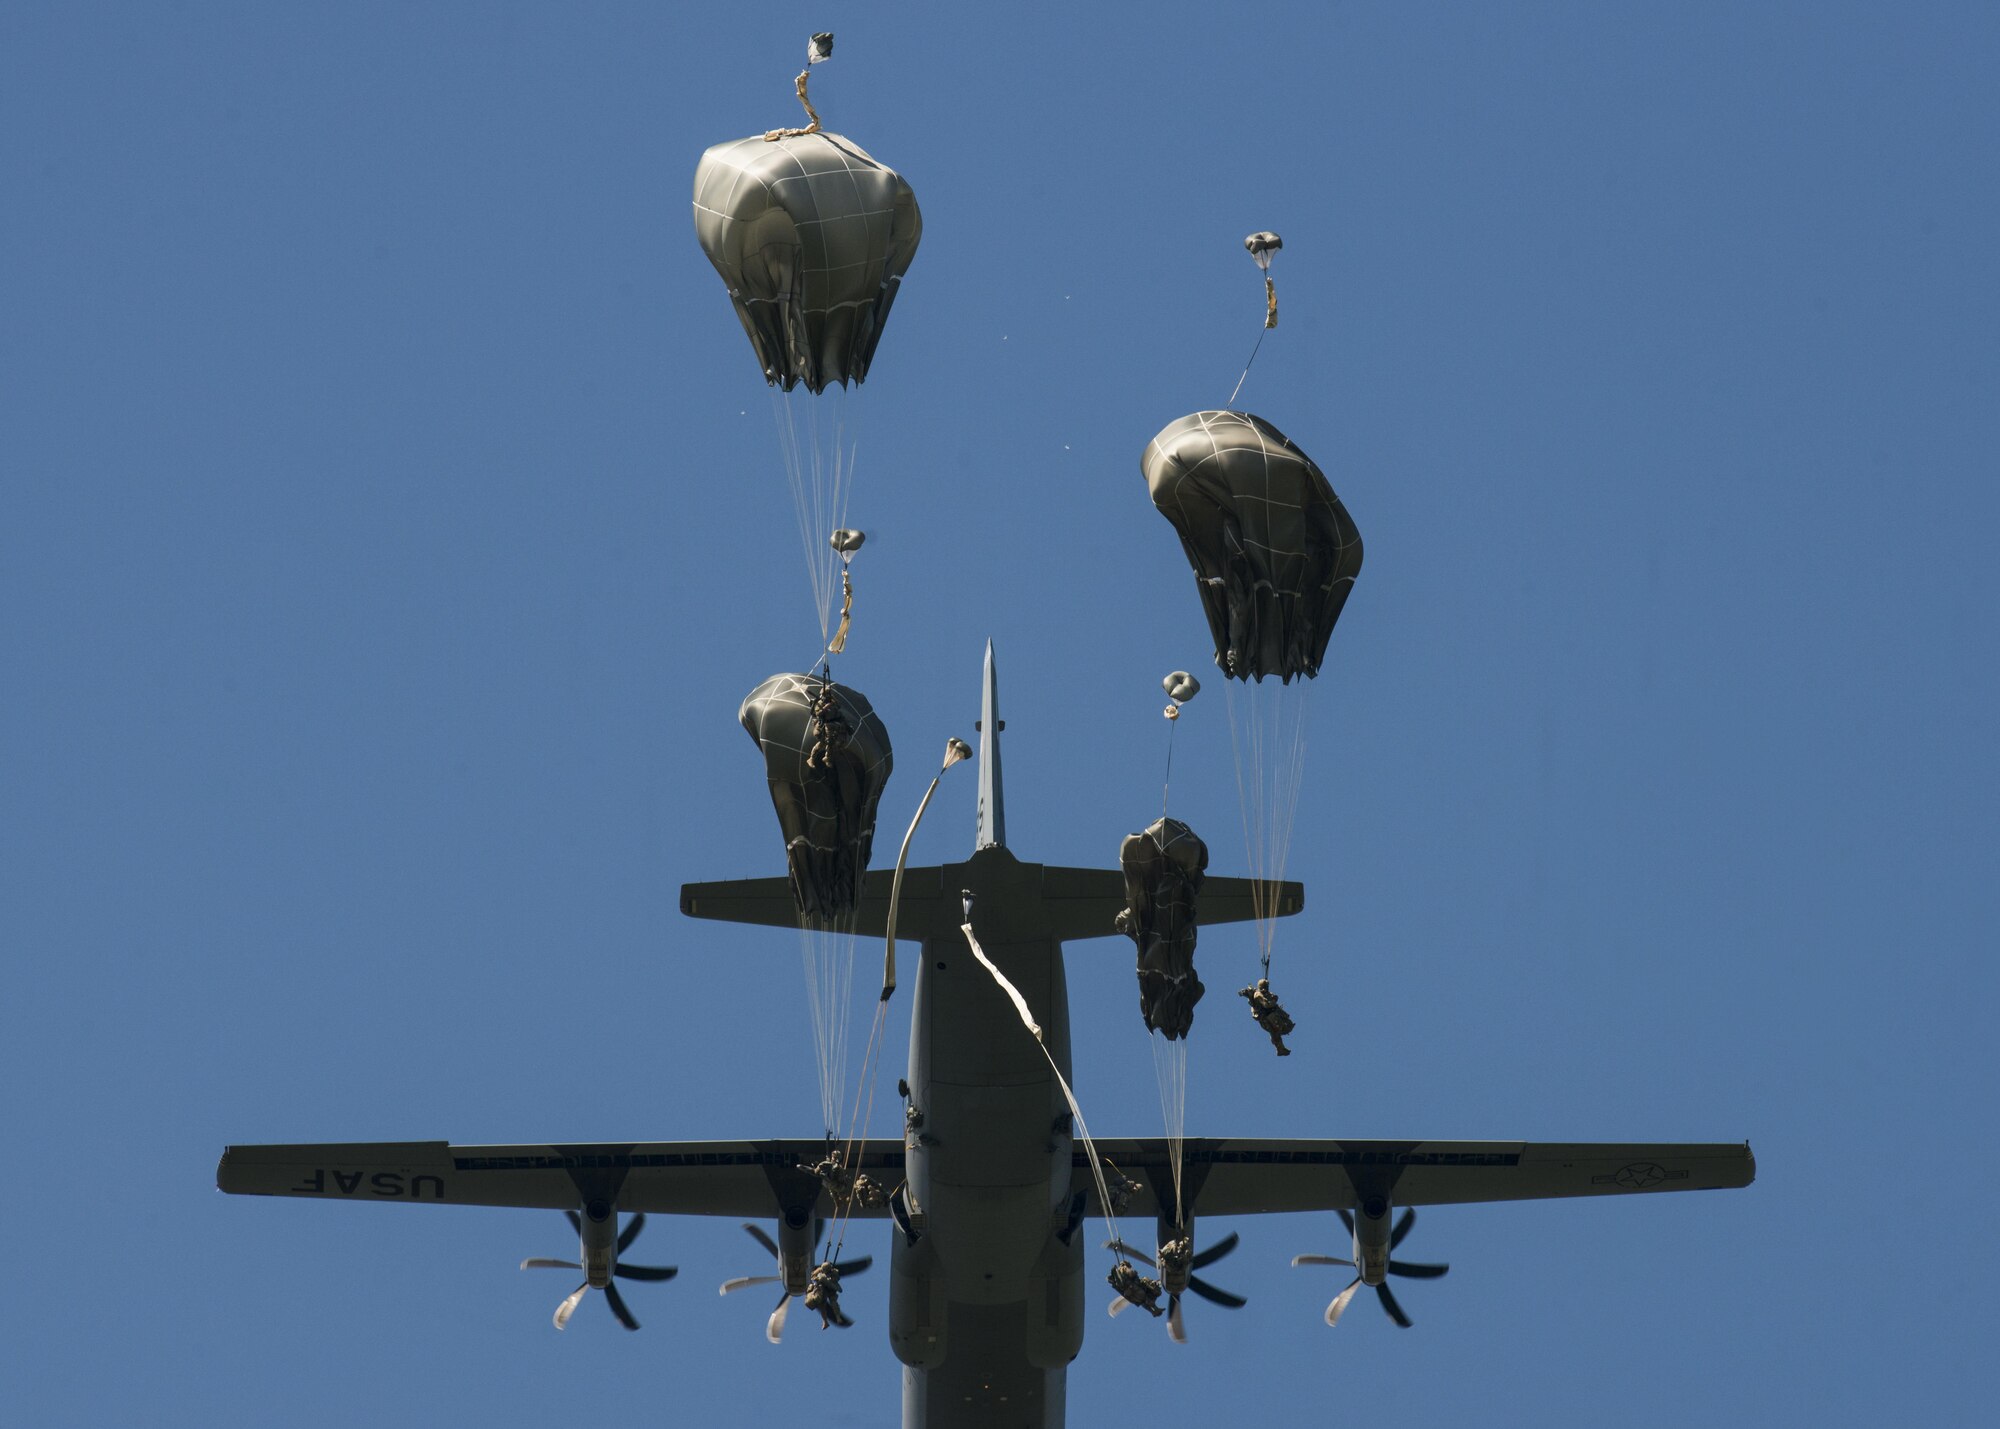 U.S. Army 173rd Airborne Brigade and German Army 1st Airborne Brigade paratroopers jump out of a C-130 Hercules near Aviano Air Base, Italy, Aug. 25, 2016. The C-130 was from the 86th Airlift Wing at Ramstein Air Base, Germany. (U.S. Air Force photo/Senior Airman Krystal Ardrey)